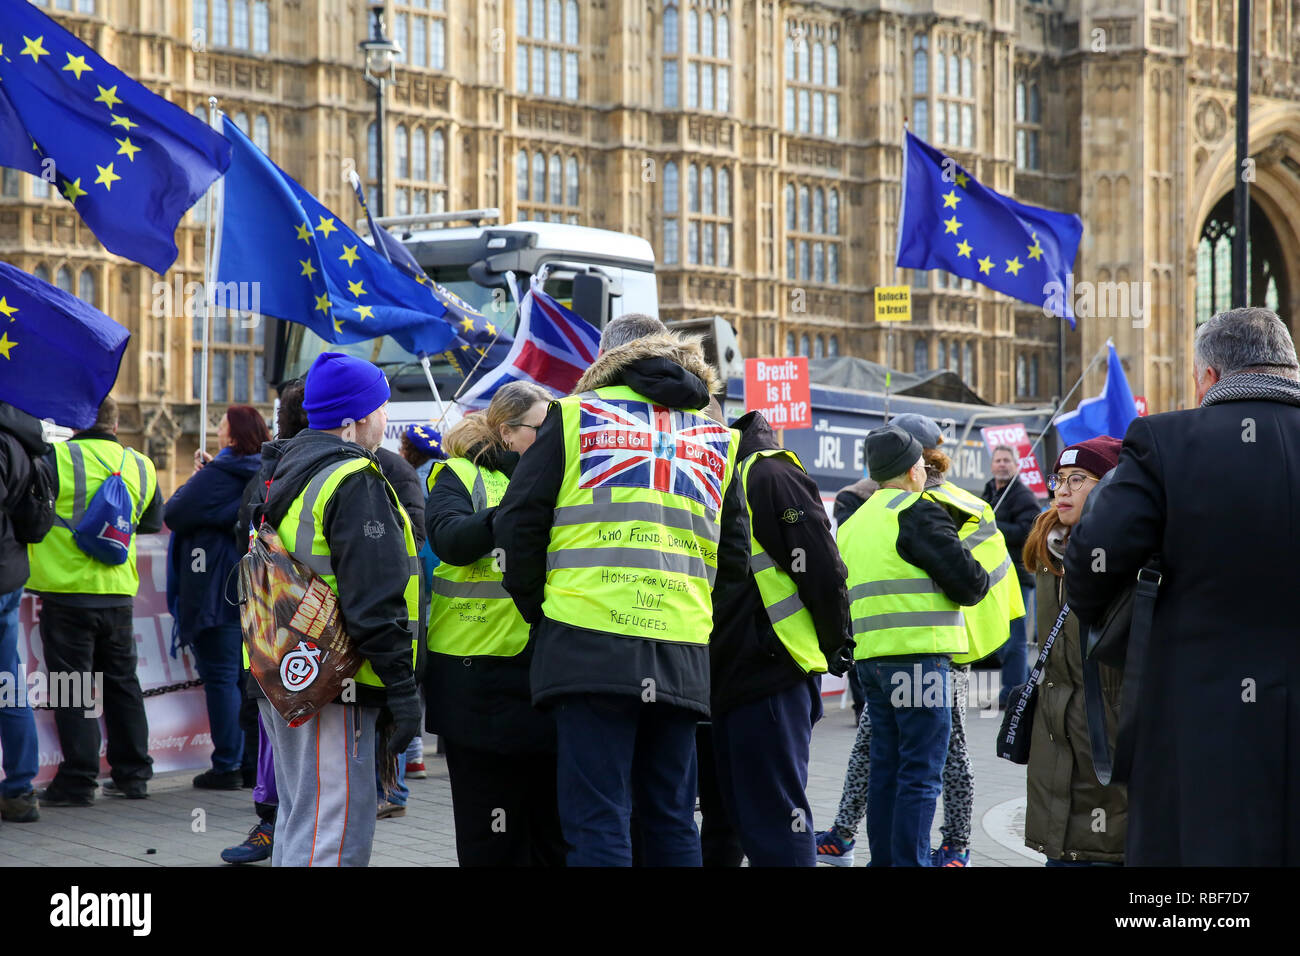 Yellow vest protesters are seen outside House of Parliament during the protest. Pro and anti- Brexit demonstrators gather outside the Houses of Parliament as the Meaningful Vote debate begins in Houses of Commons, at the end of the five day debate the MPs will vote on Prime Minister, Theresa May's Brexit deal. Stock Photo